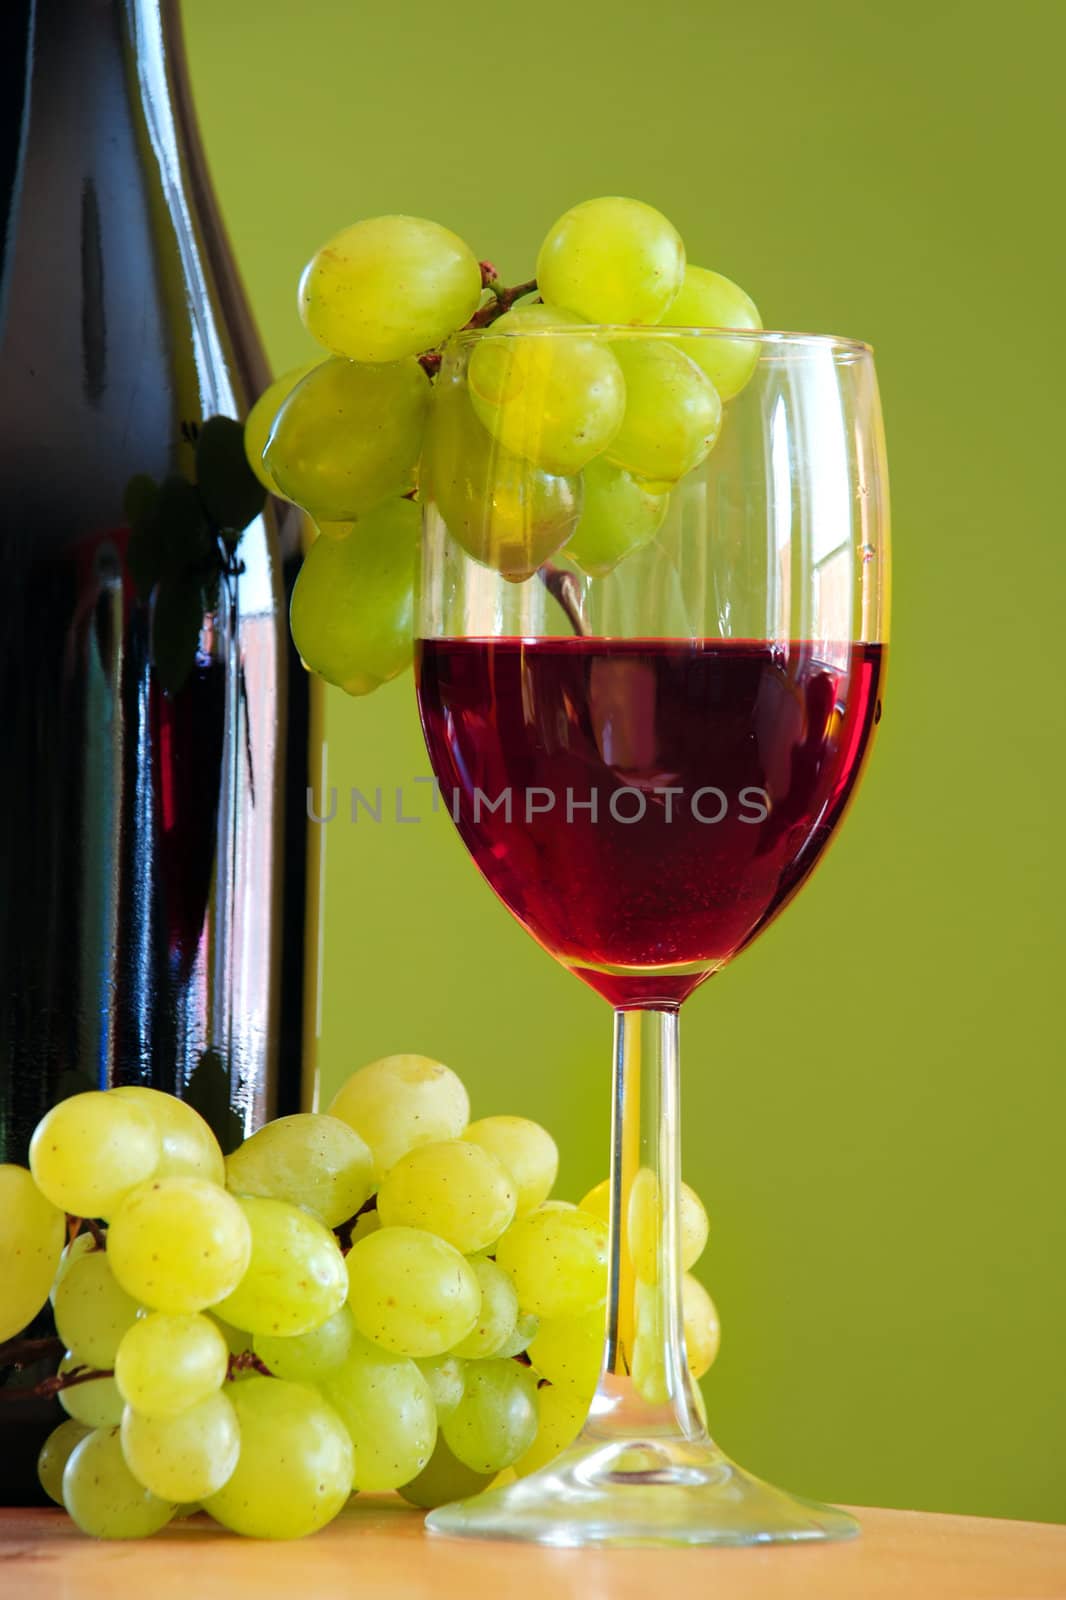 Red wine glass with grapes cluster and bottle over green